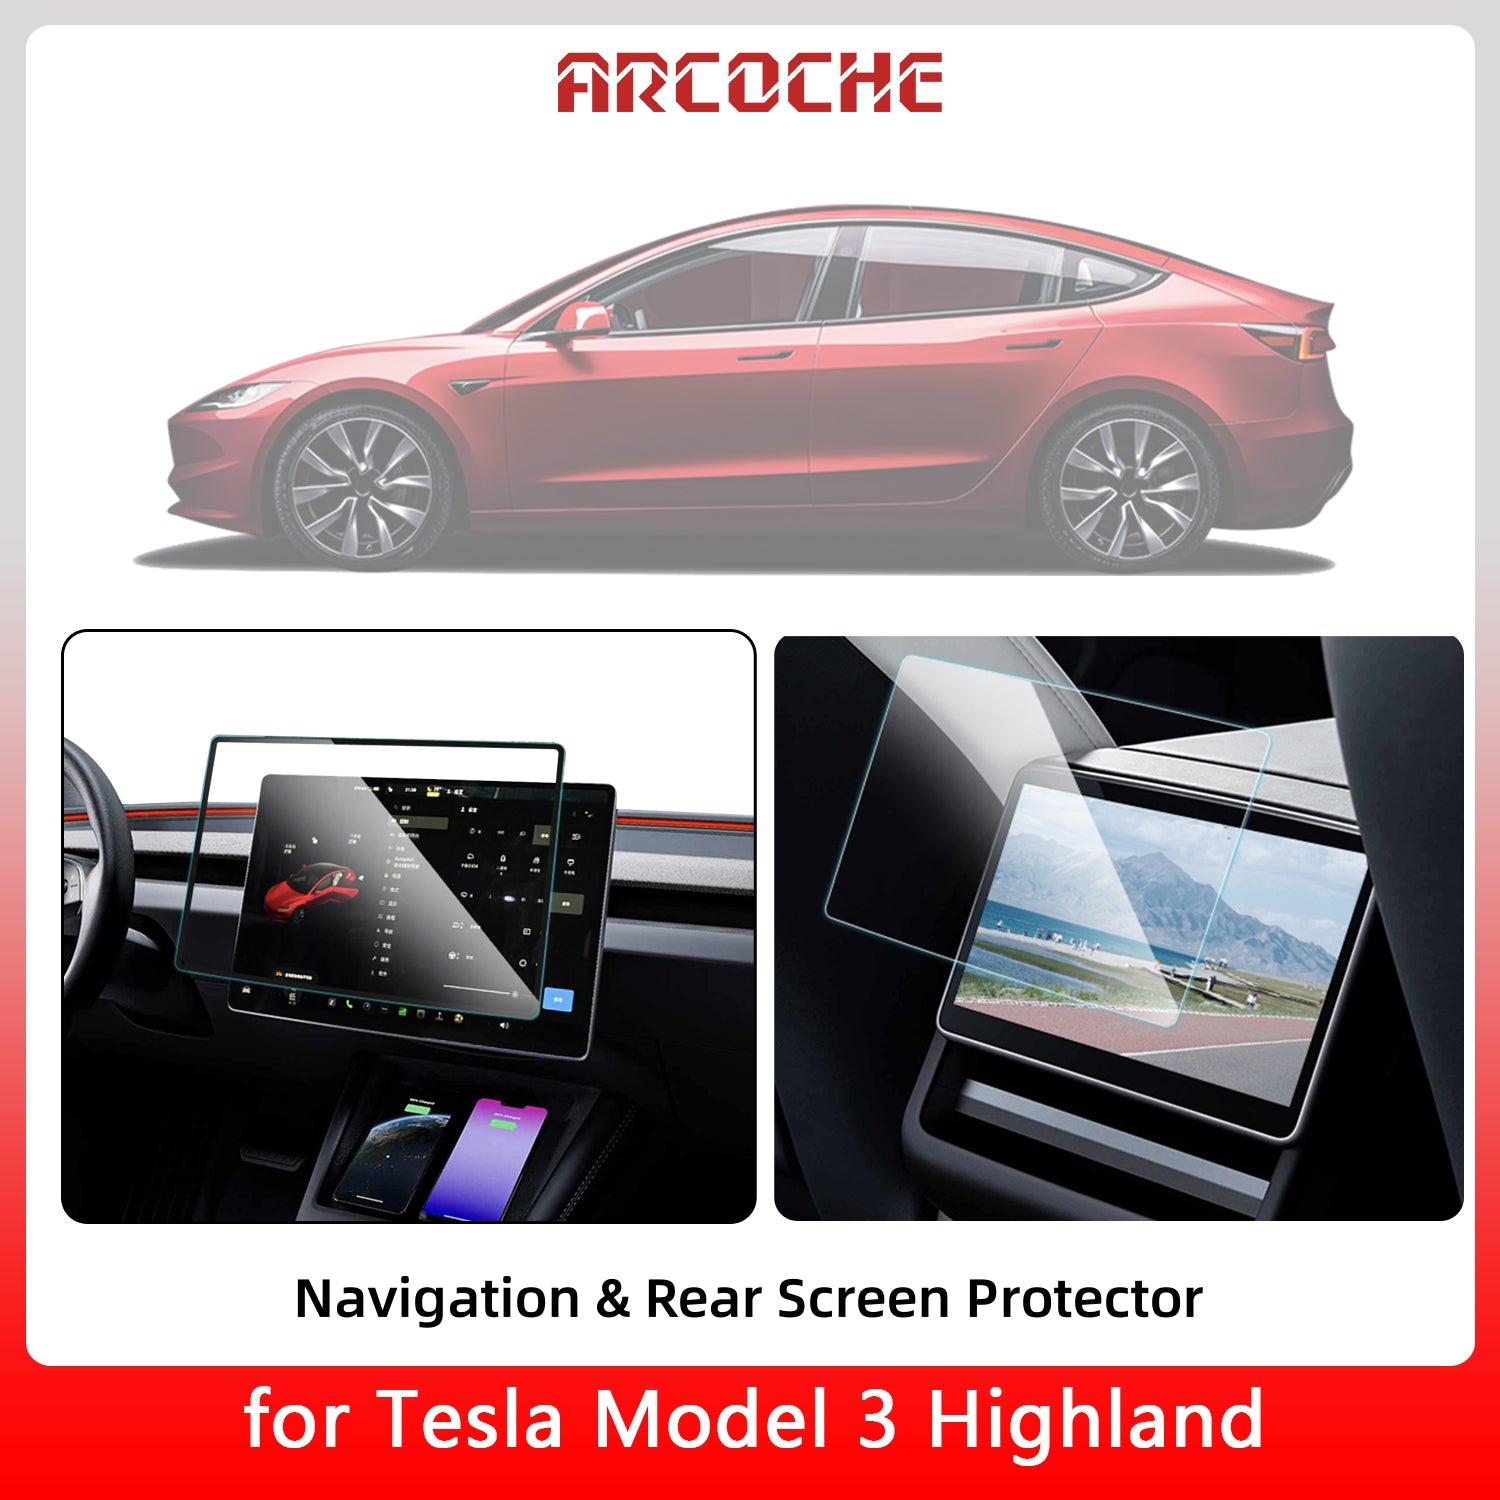 Front and Rear Screen Protectors for Tesla Model 3 Highland – Arcoche